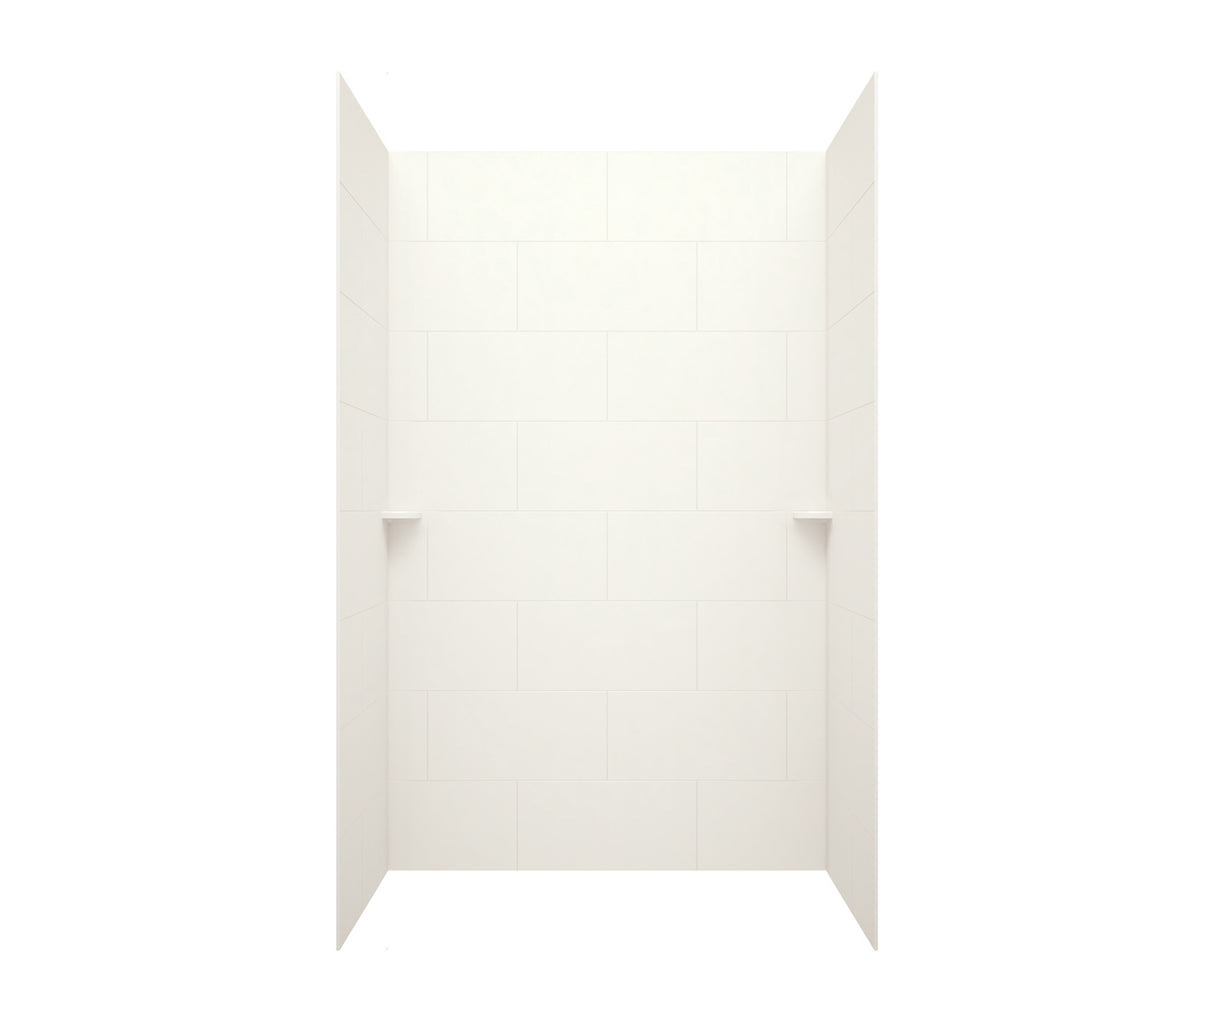 Swanstone TSMK84-3662 36 x 62 x 84 Swanstone Traditional Subway Tile Glue up Shower Wall Kit in Bisque TSMK843662.018